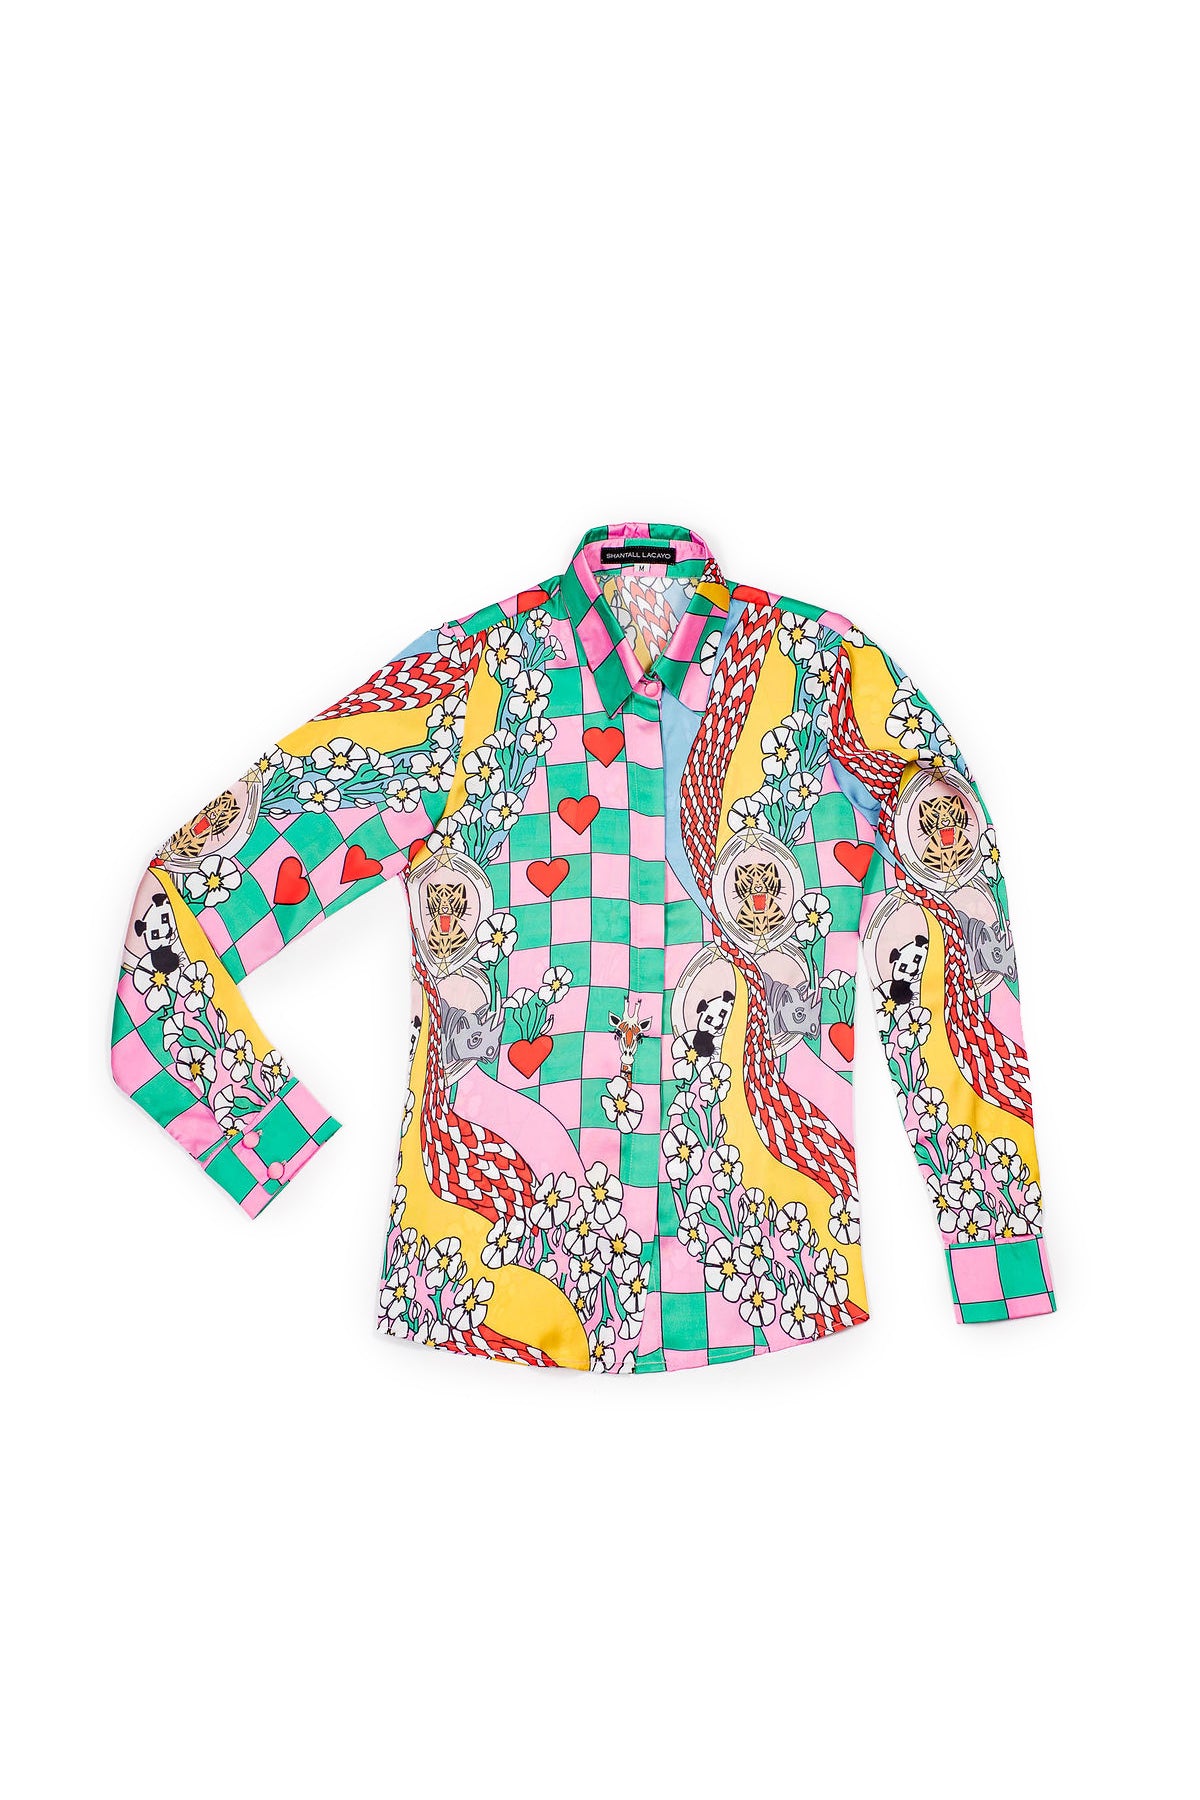 Classic Button Up Shirt One Of a Kind Print - Shantall Lacayo